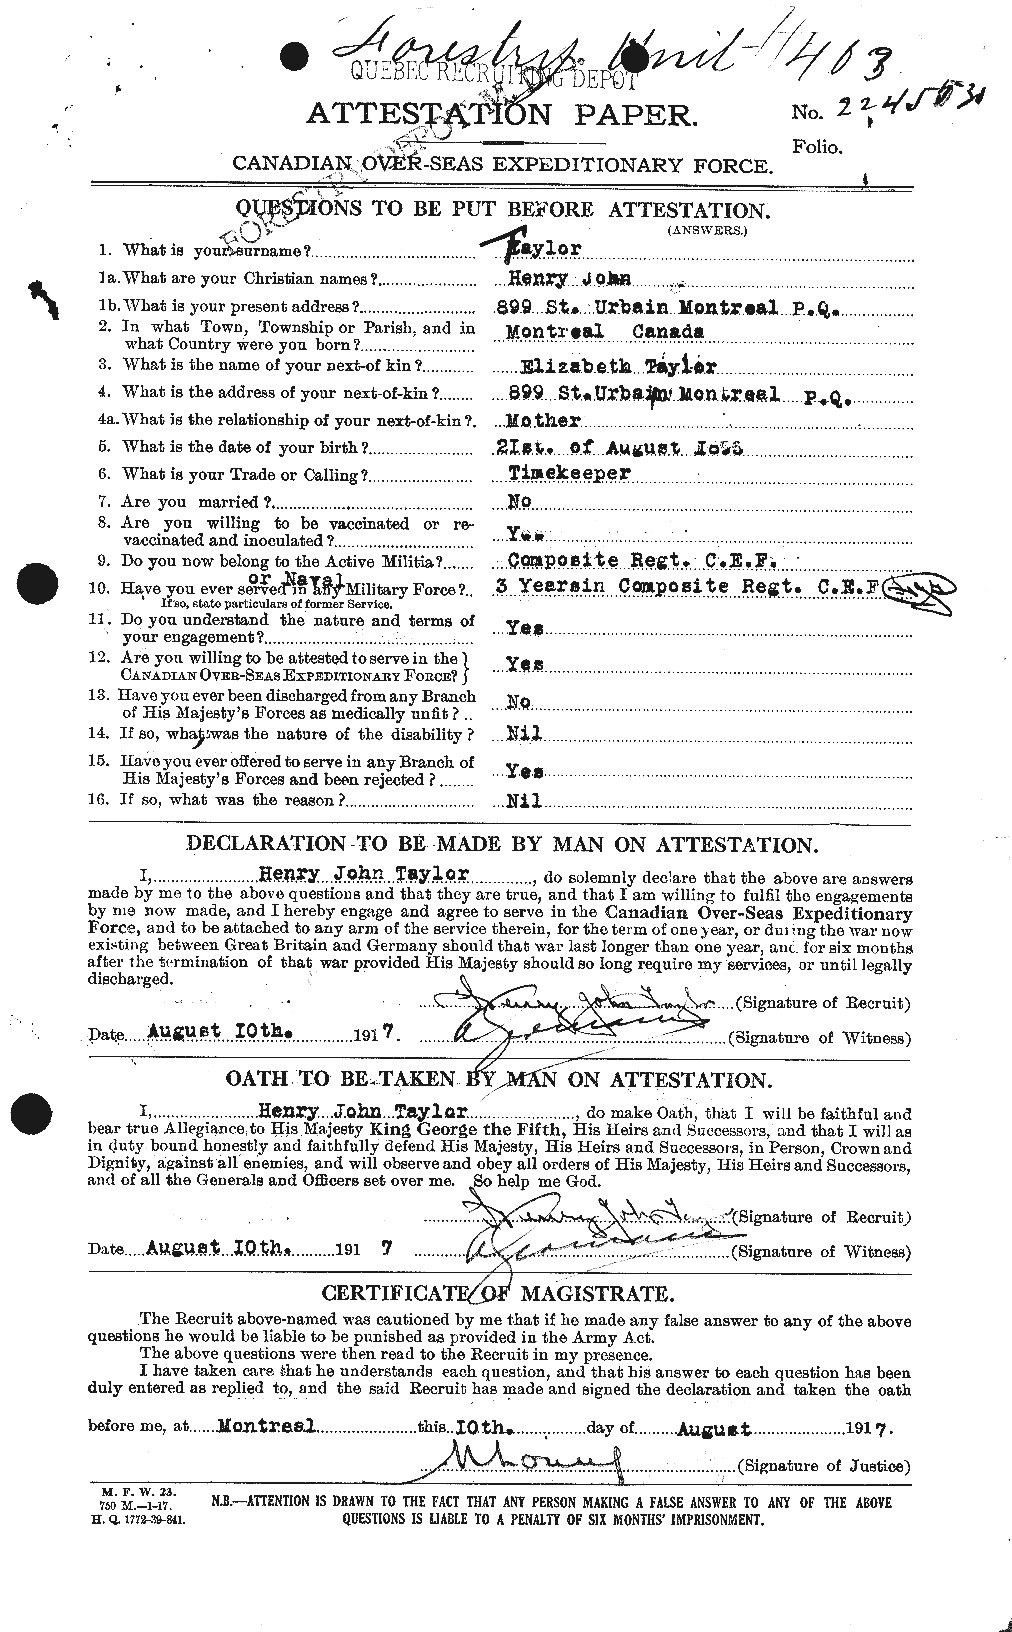 Personnel Records of the First World War - CEF 626546a